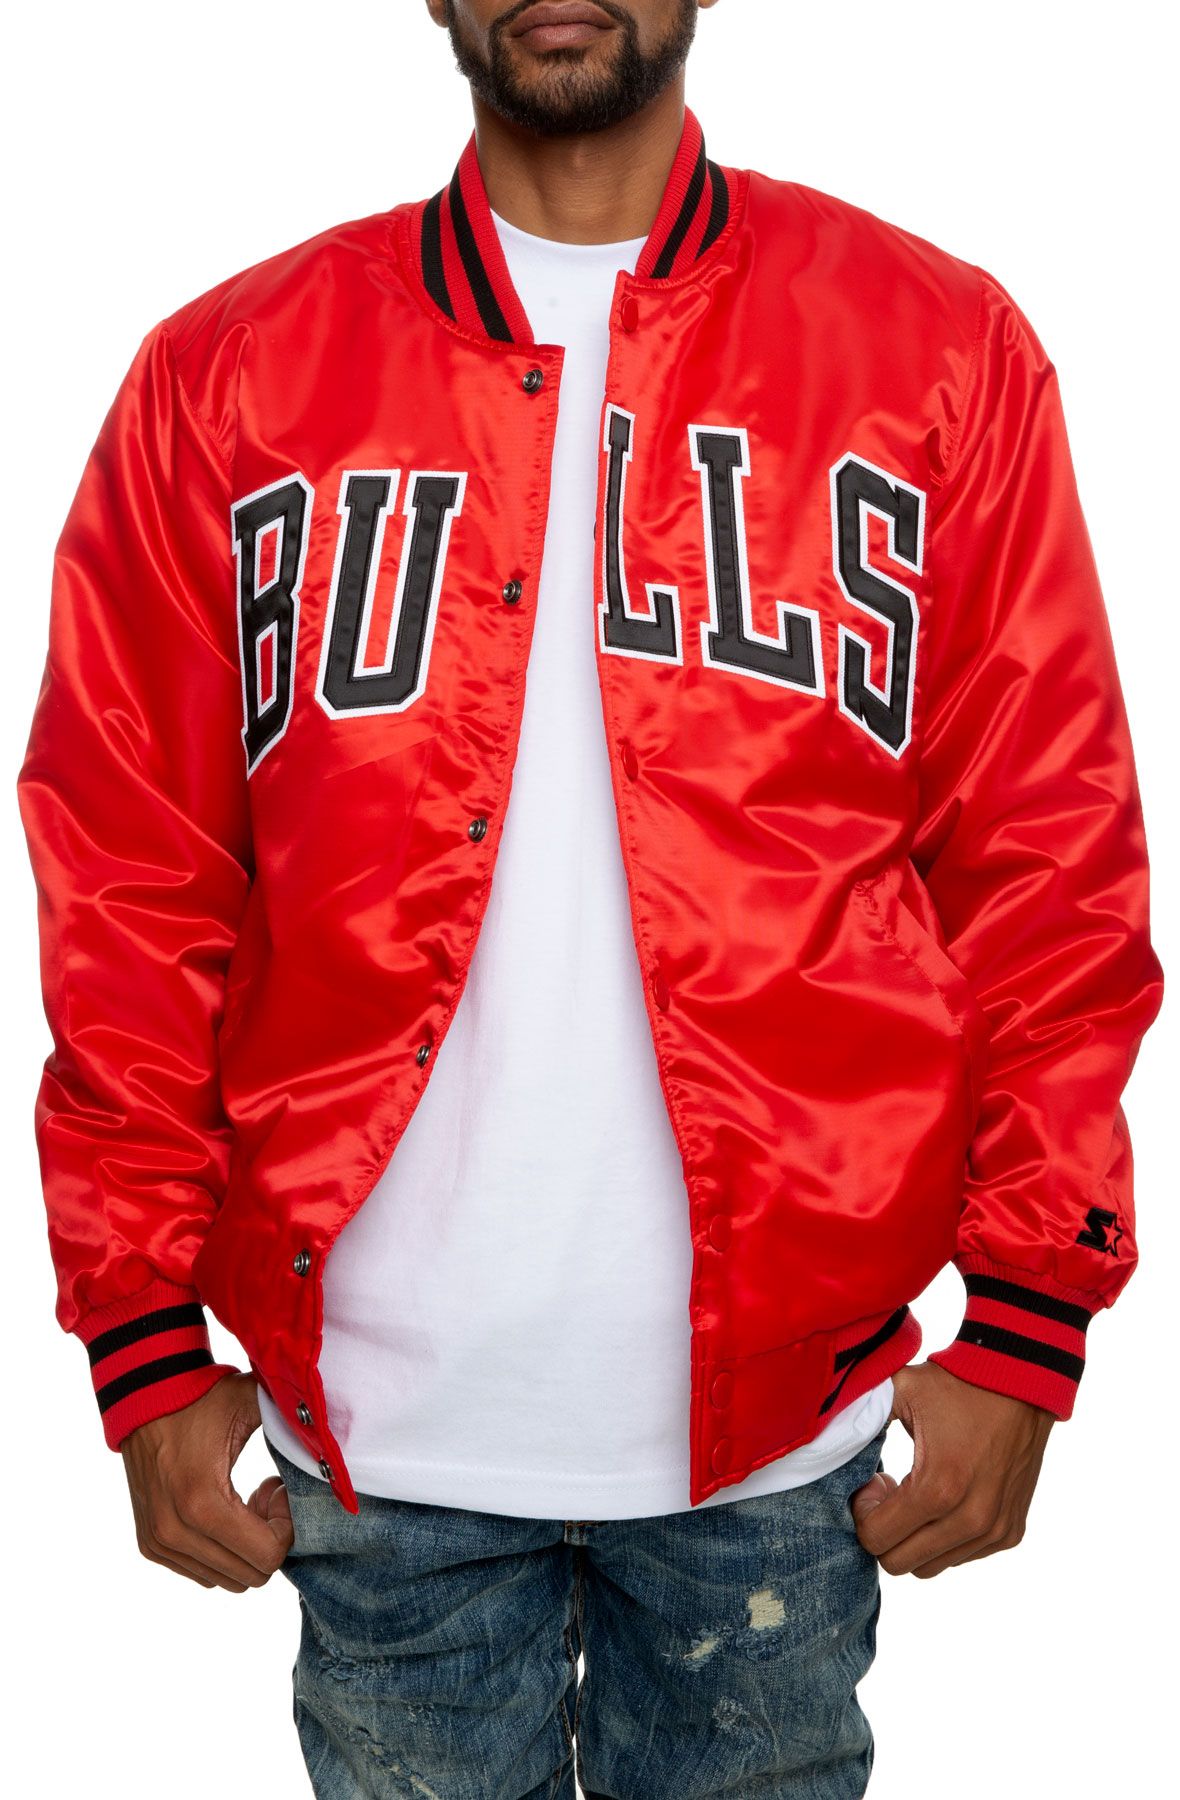 chicago bulls jackets for sale